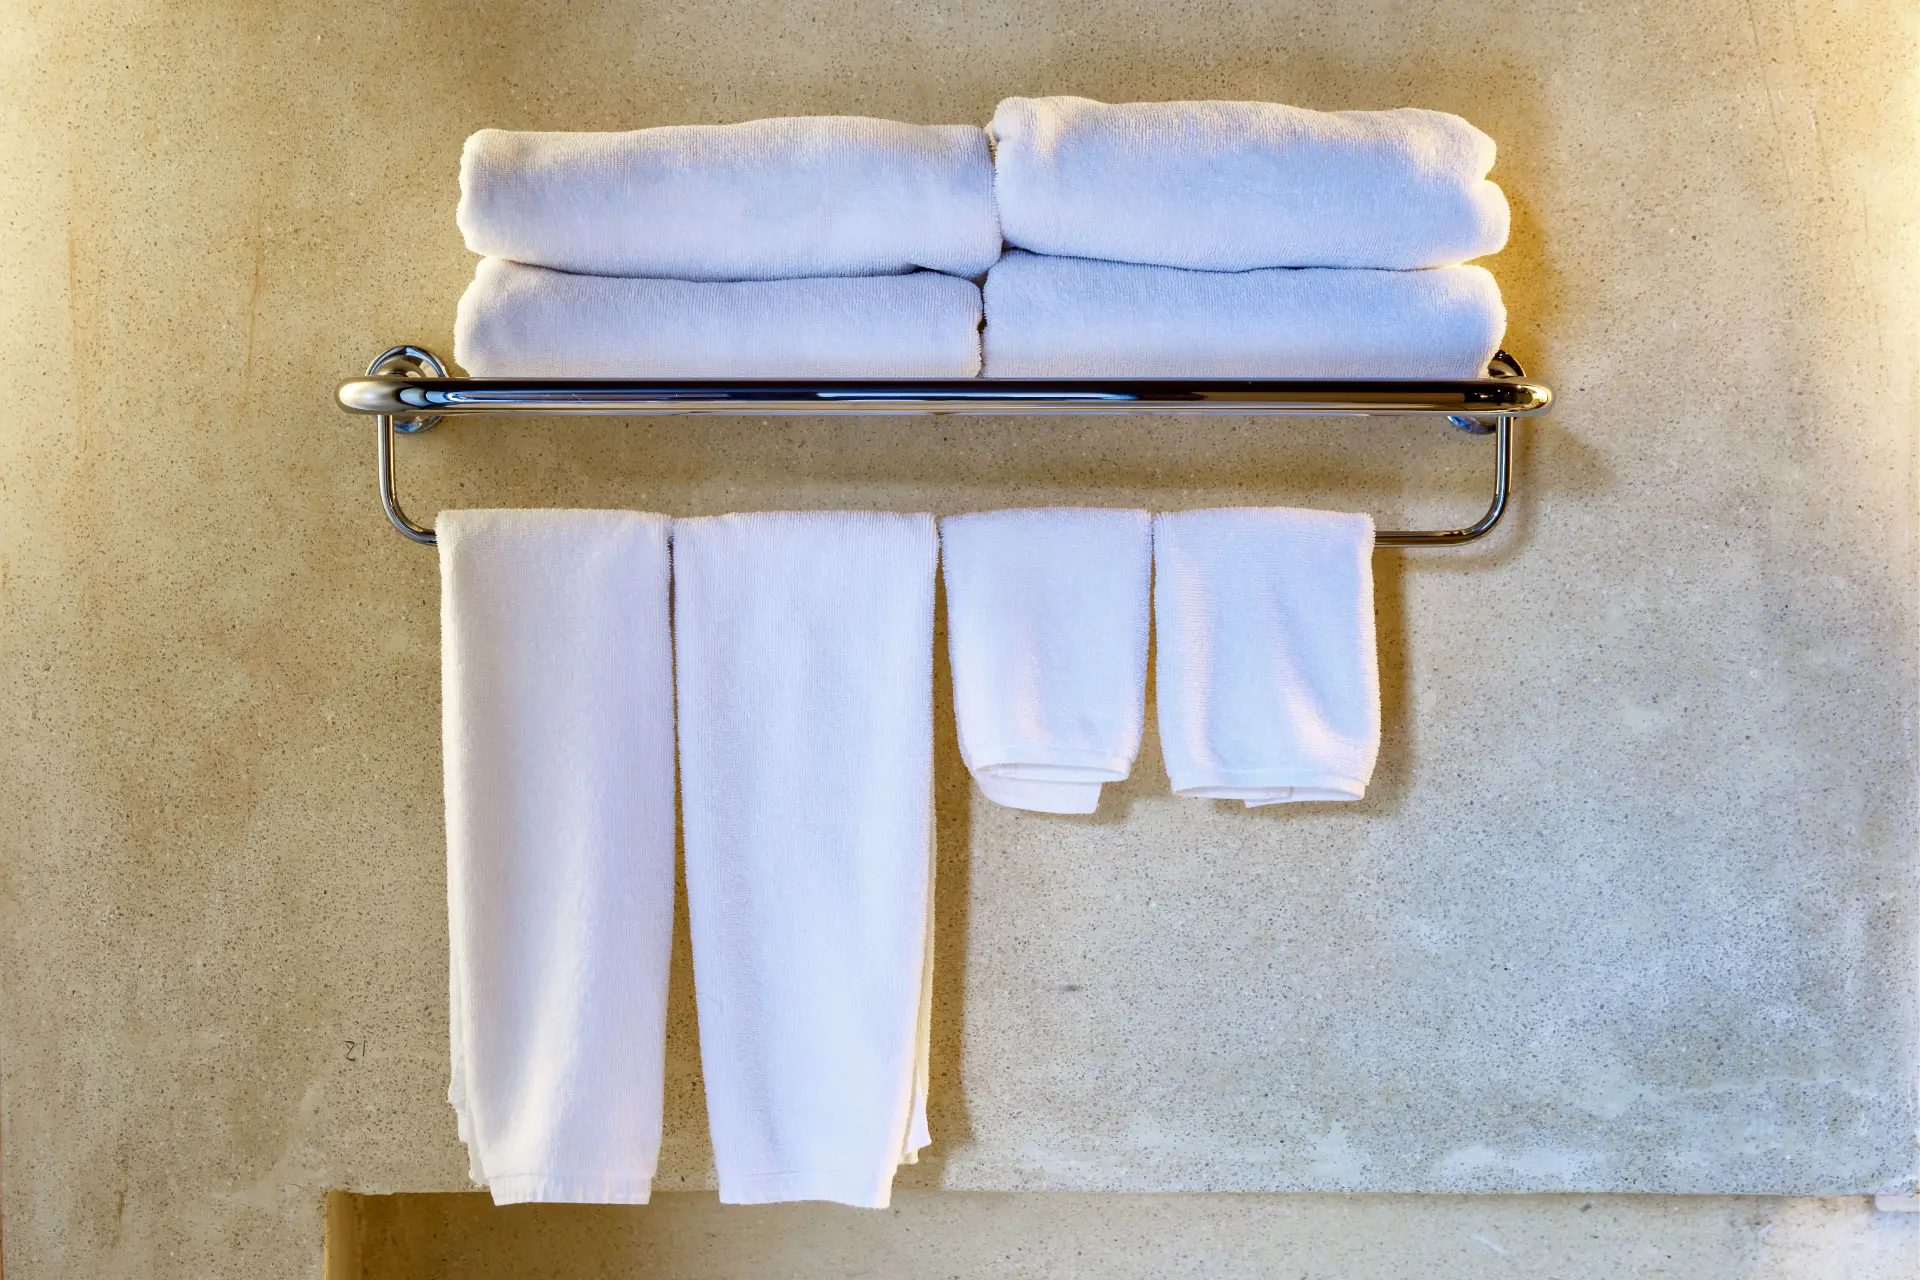 Where to Hang Towels in the Bathroom